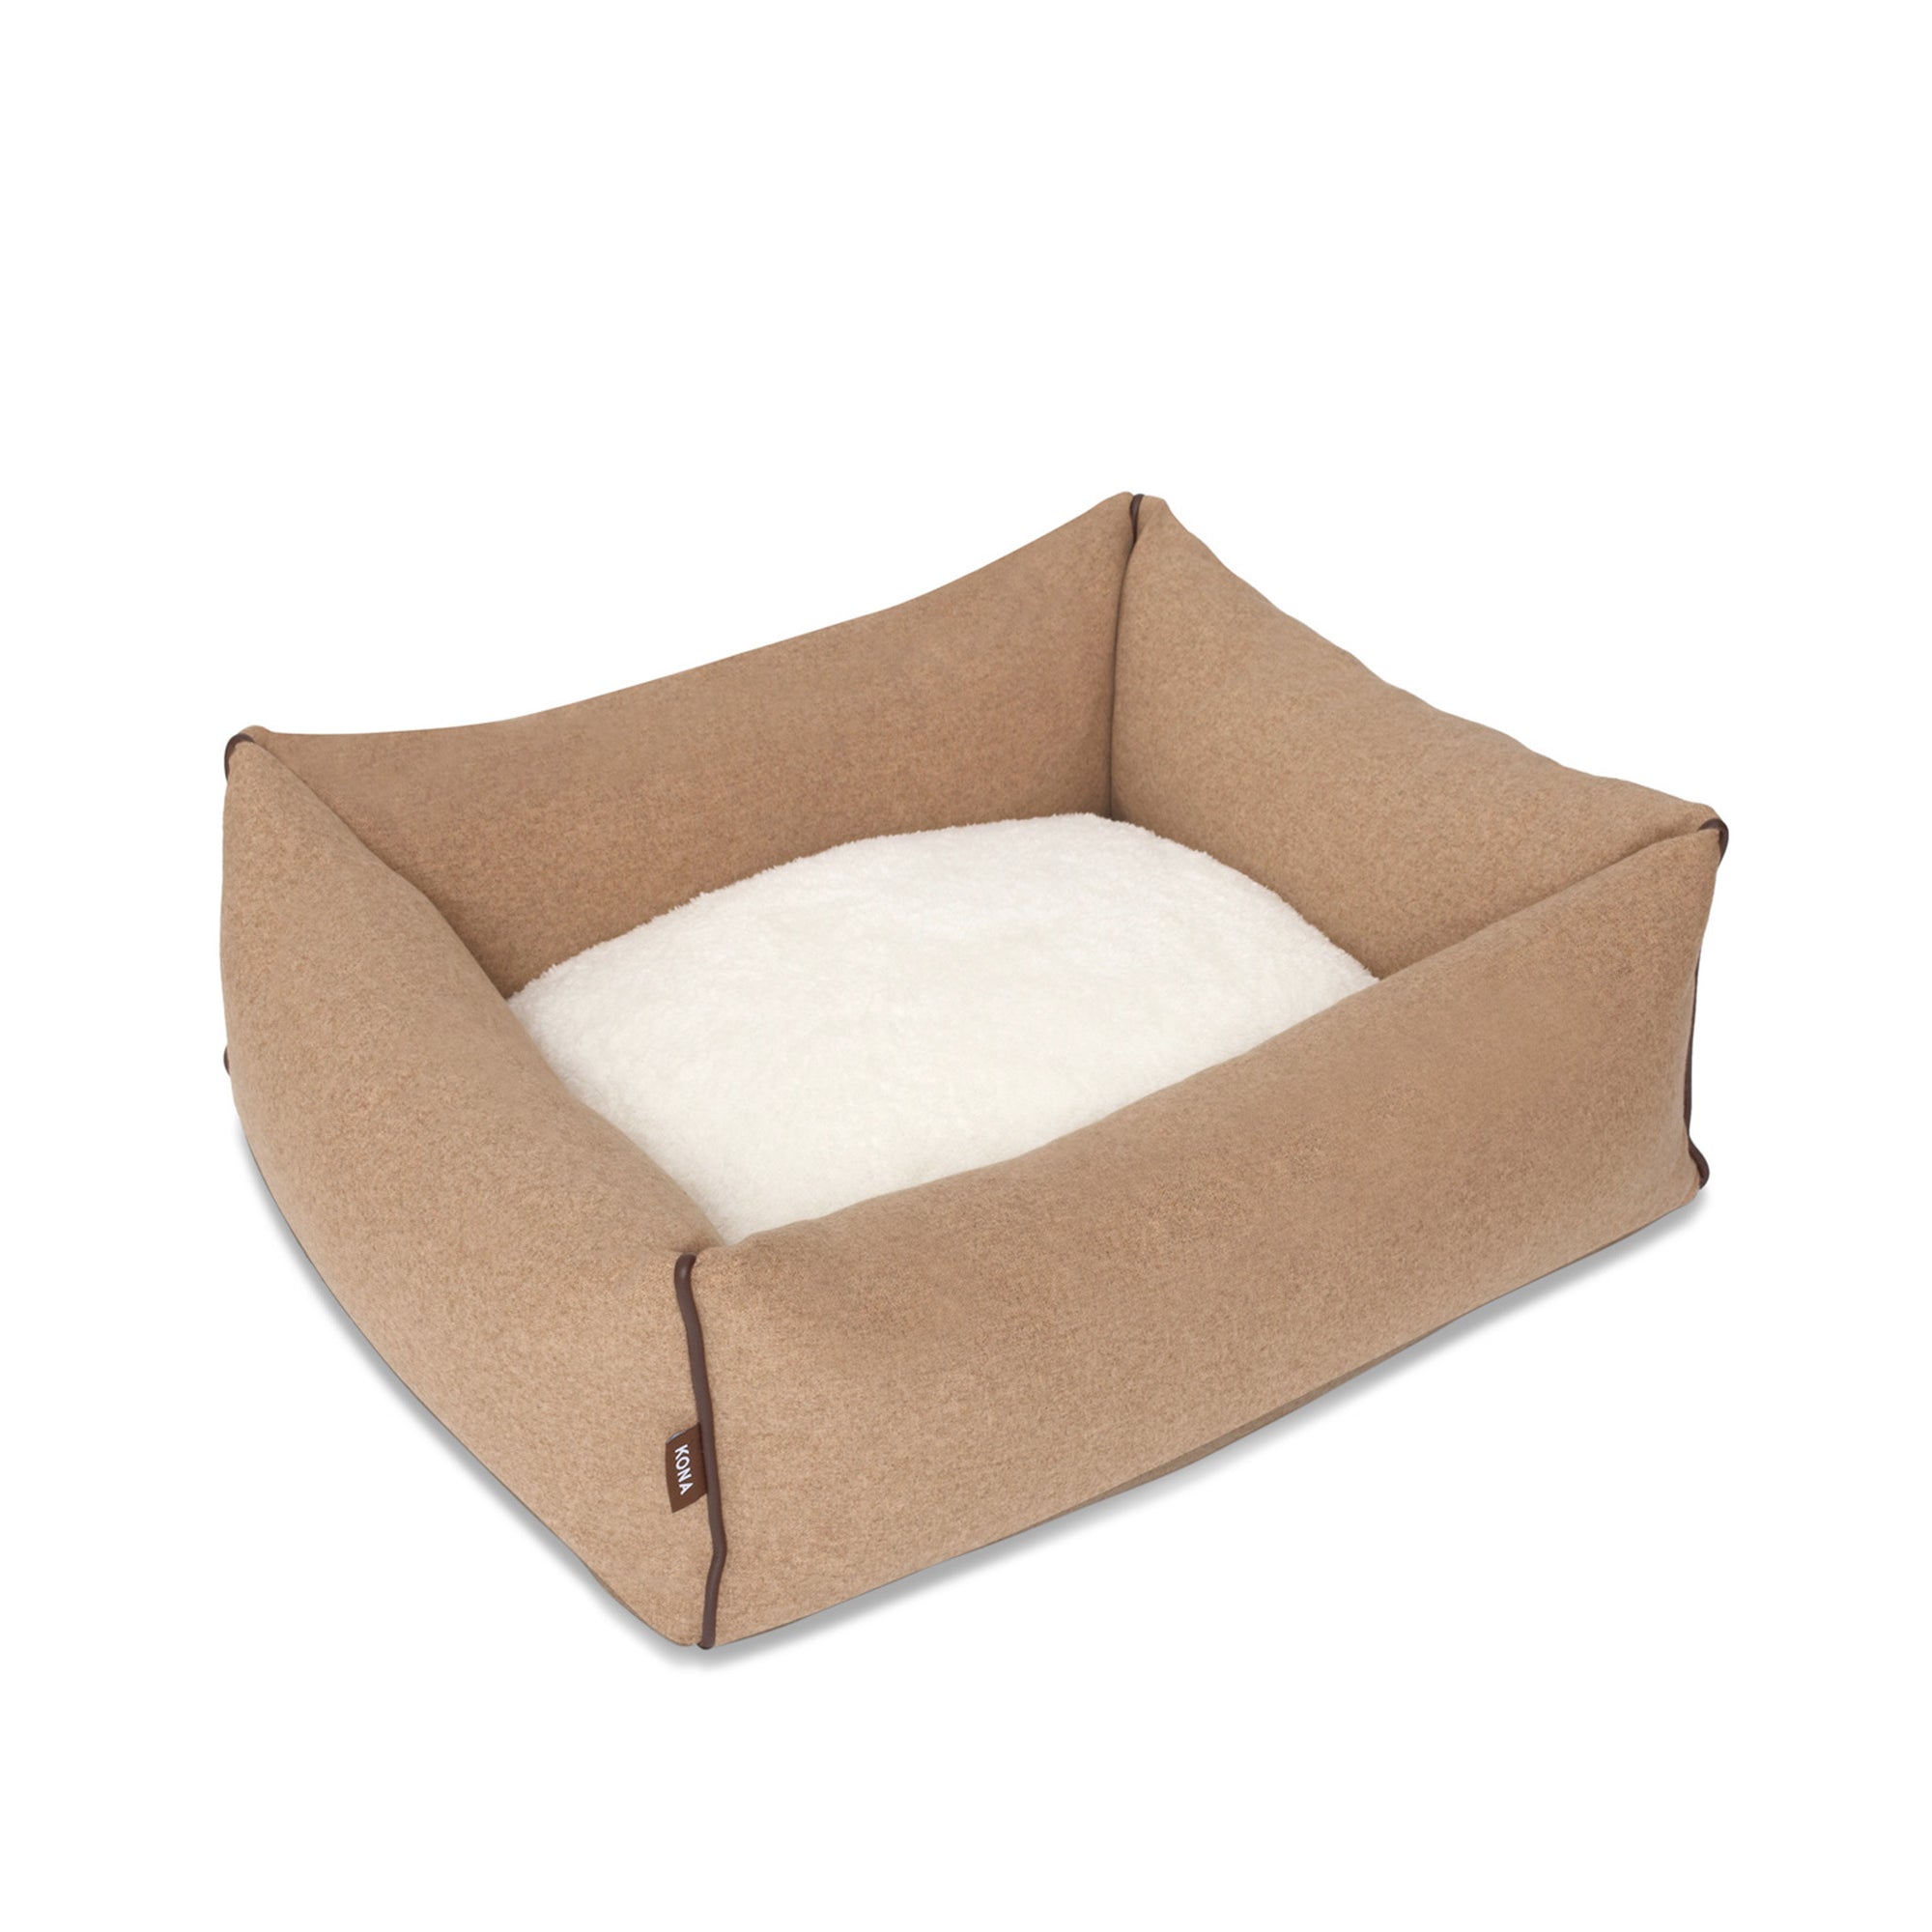 KONA CAVE® luxury dog bed in light brown flannel fabric, with leather trim